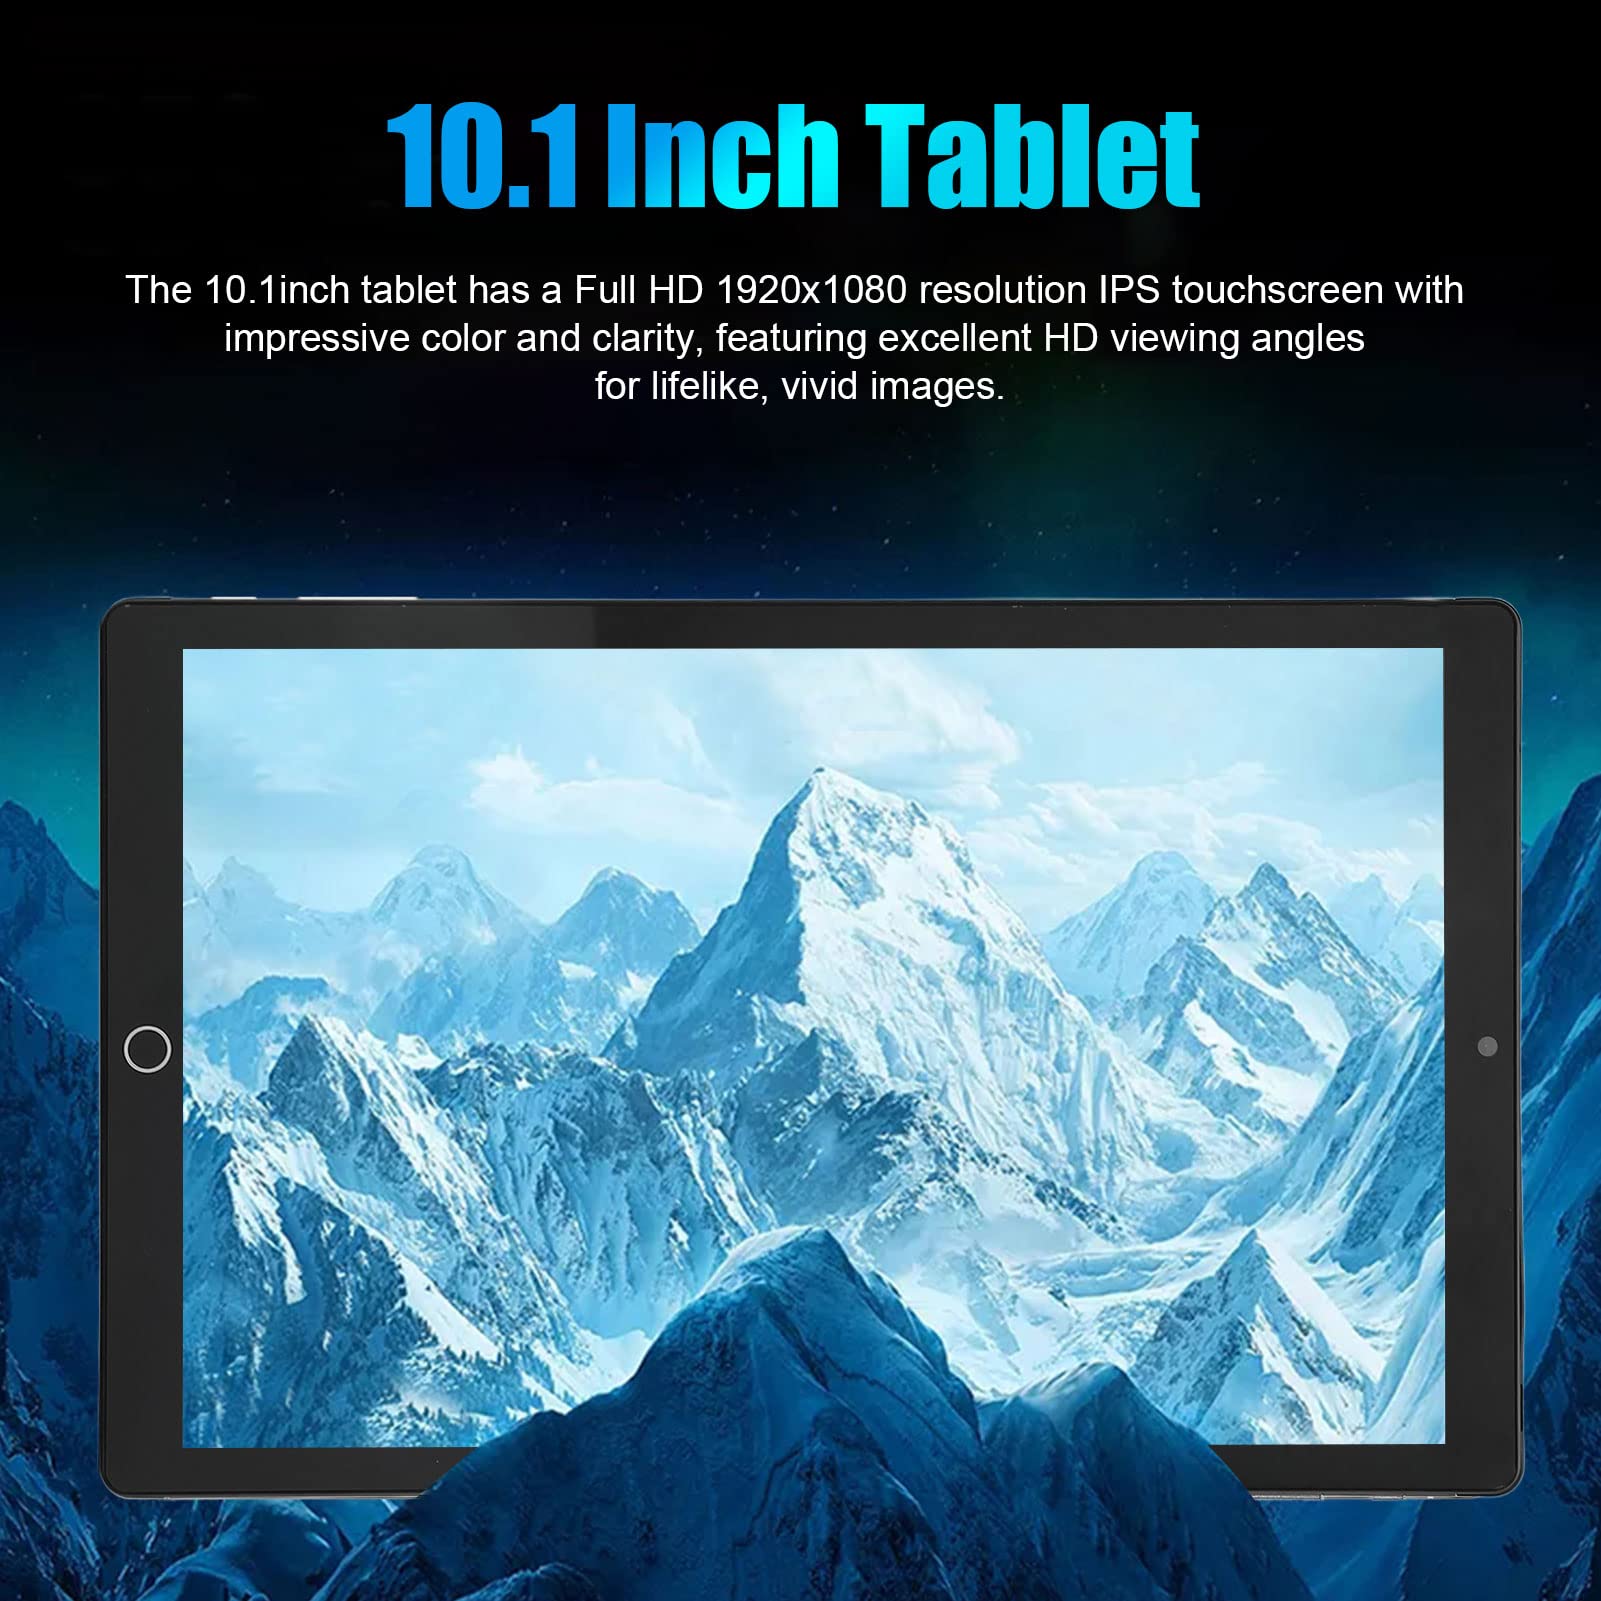 Yunseity 10.1 Inch Tablet, 2.4 5G WiFi Smart Tablet, IPS HD Touch Screen Tablet, 6G RAM 128G ROM, Octa Core Processor, GPS Navigation, Battery Life, 5MP 13MP Cameras